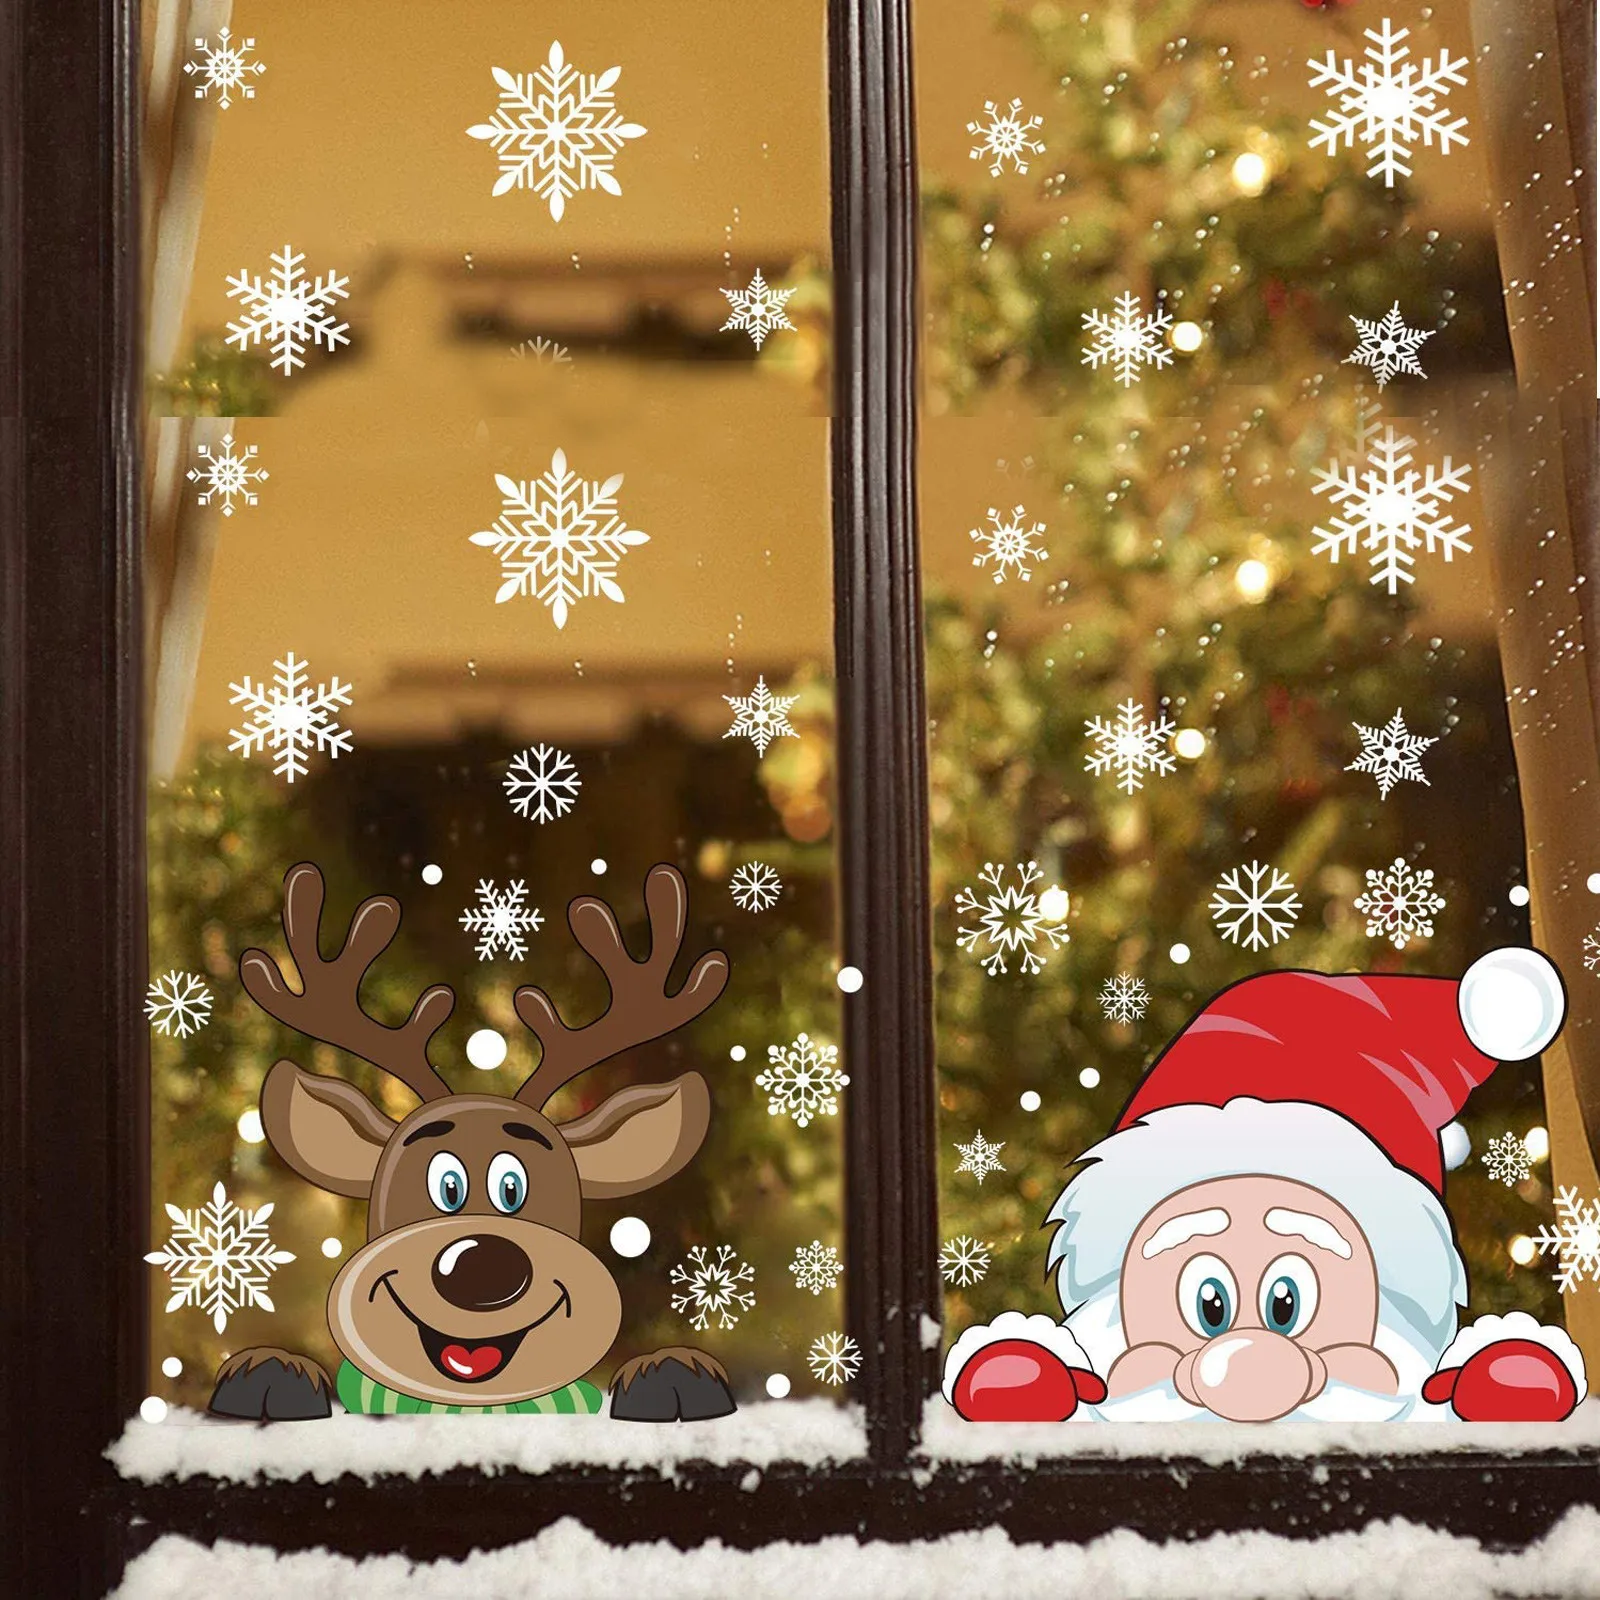 Xmas Home Window Decoration Wall Stickers Decal for Festive Kids Room Decor Holiday Party Shan-S Christmas Wall Decals Snowflakes Santa Claus Window Clings Decal Stickers 